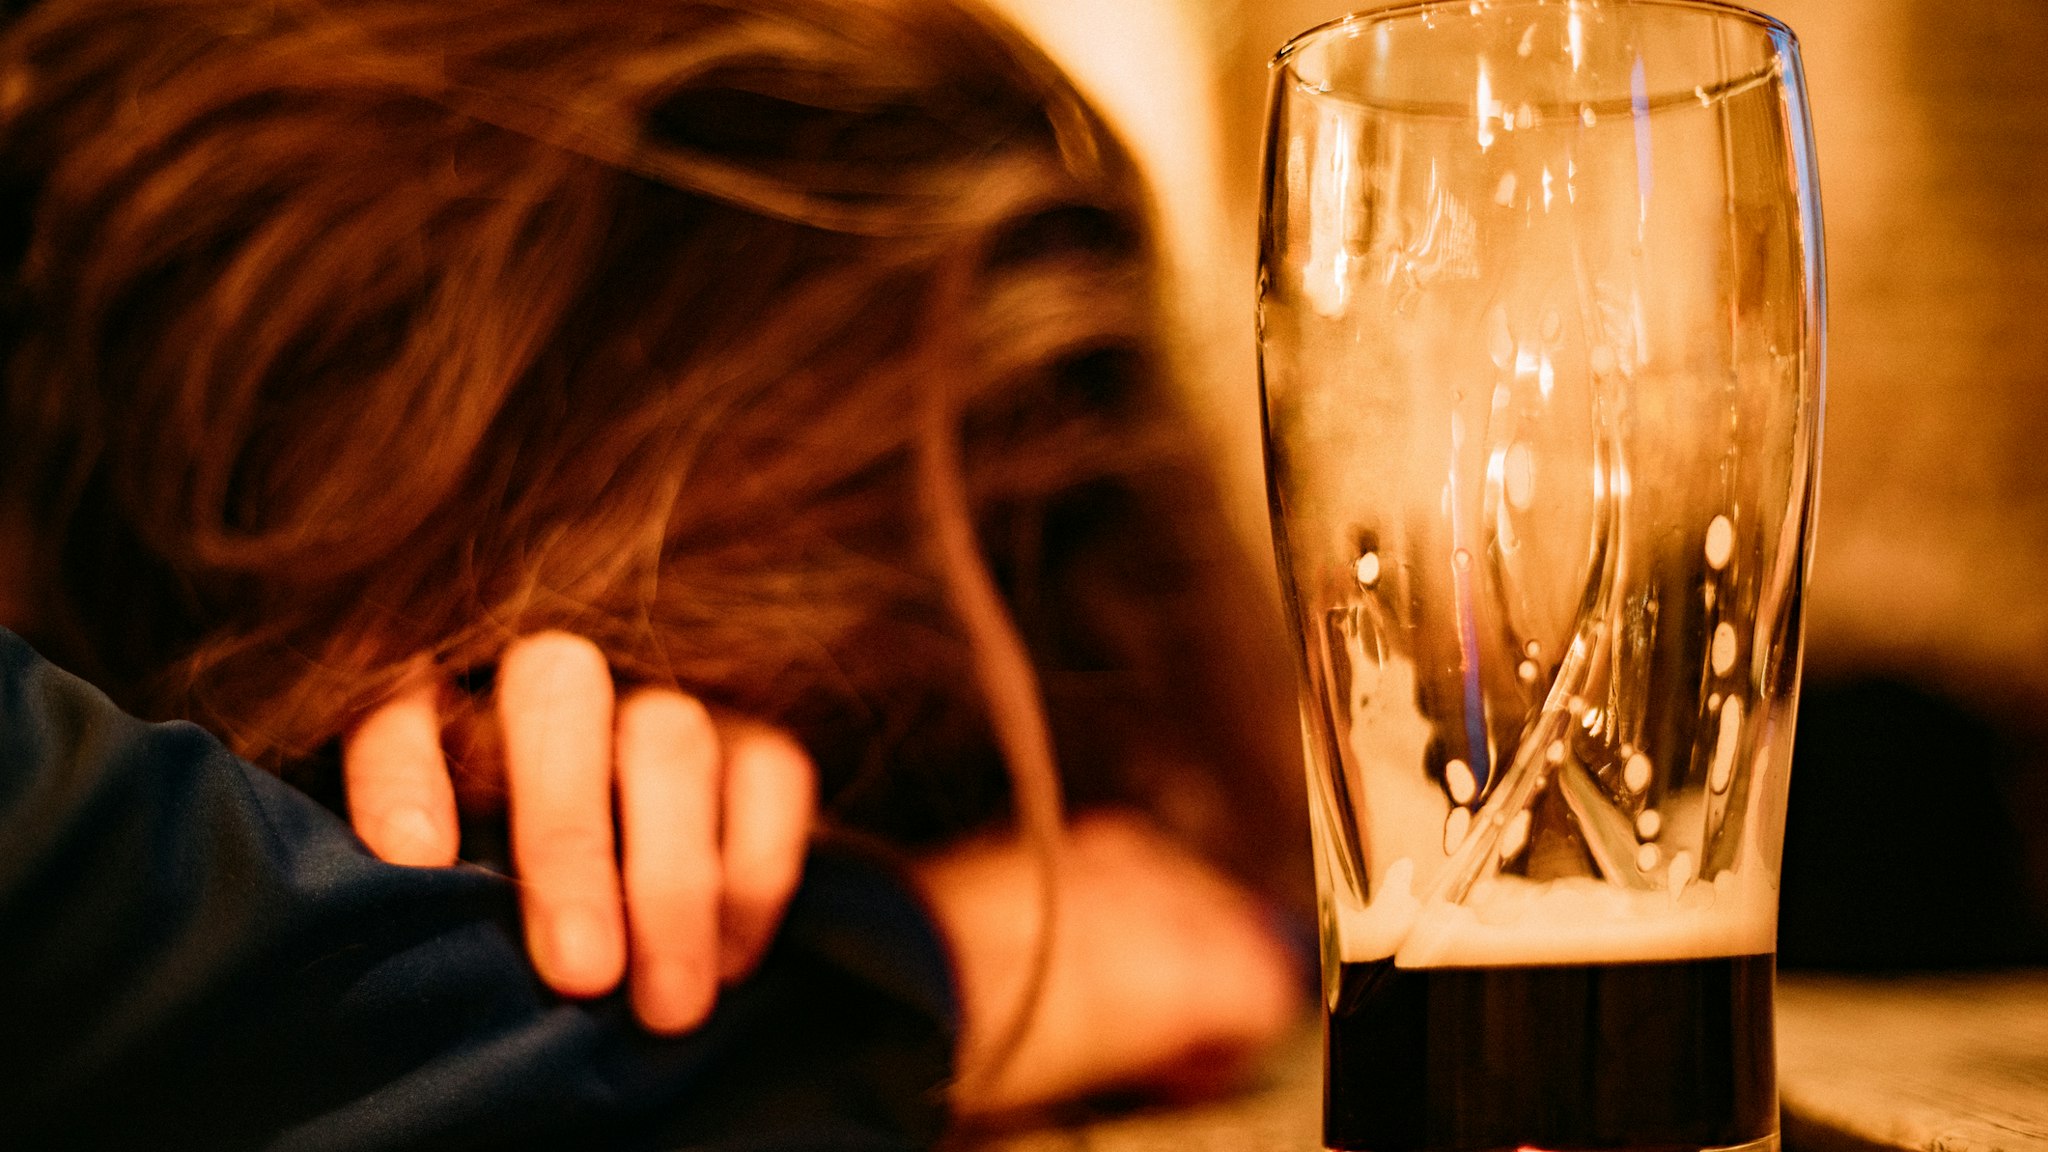 Young drunk woman sleeping on bar counter drinking dark beer - stock photo